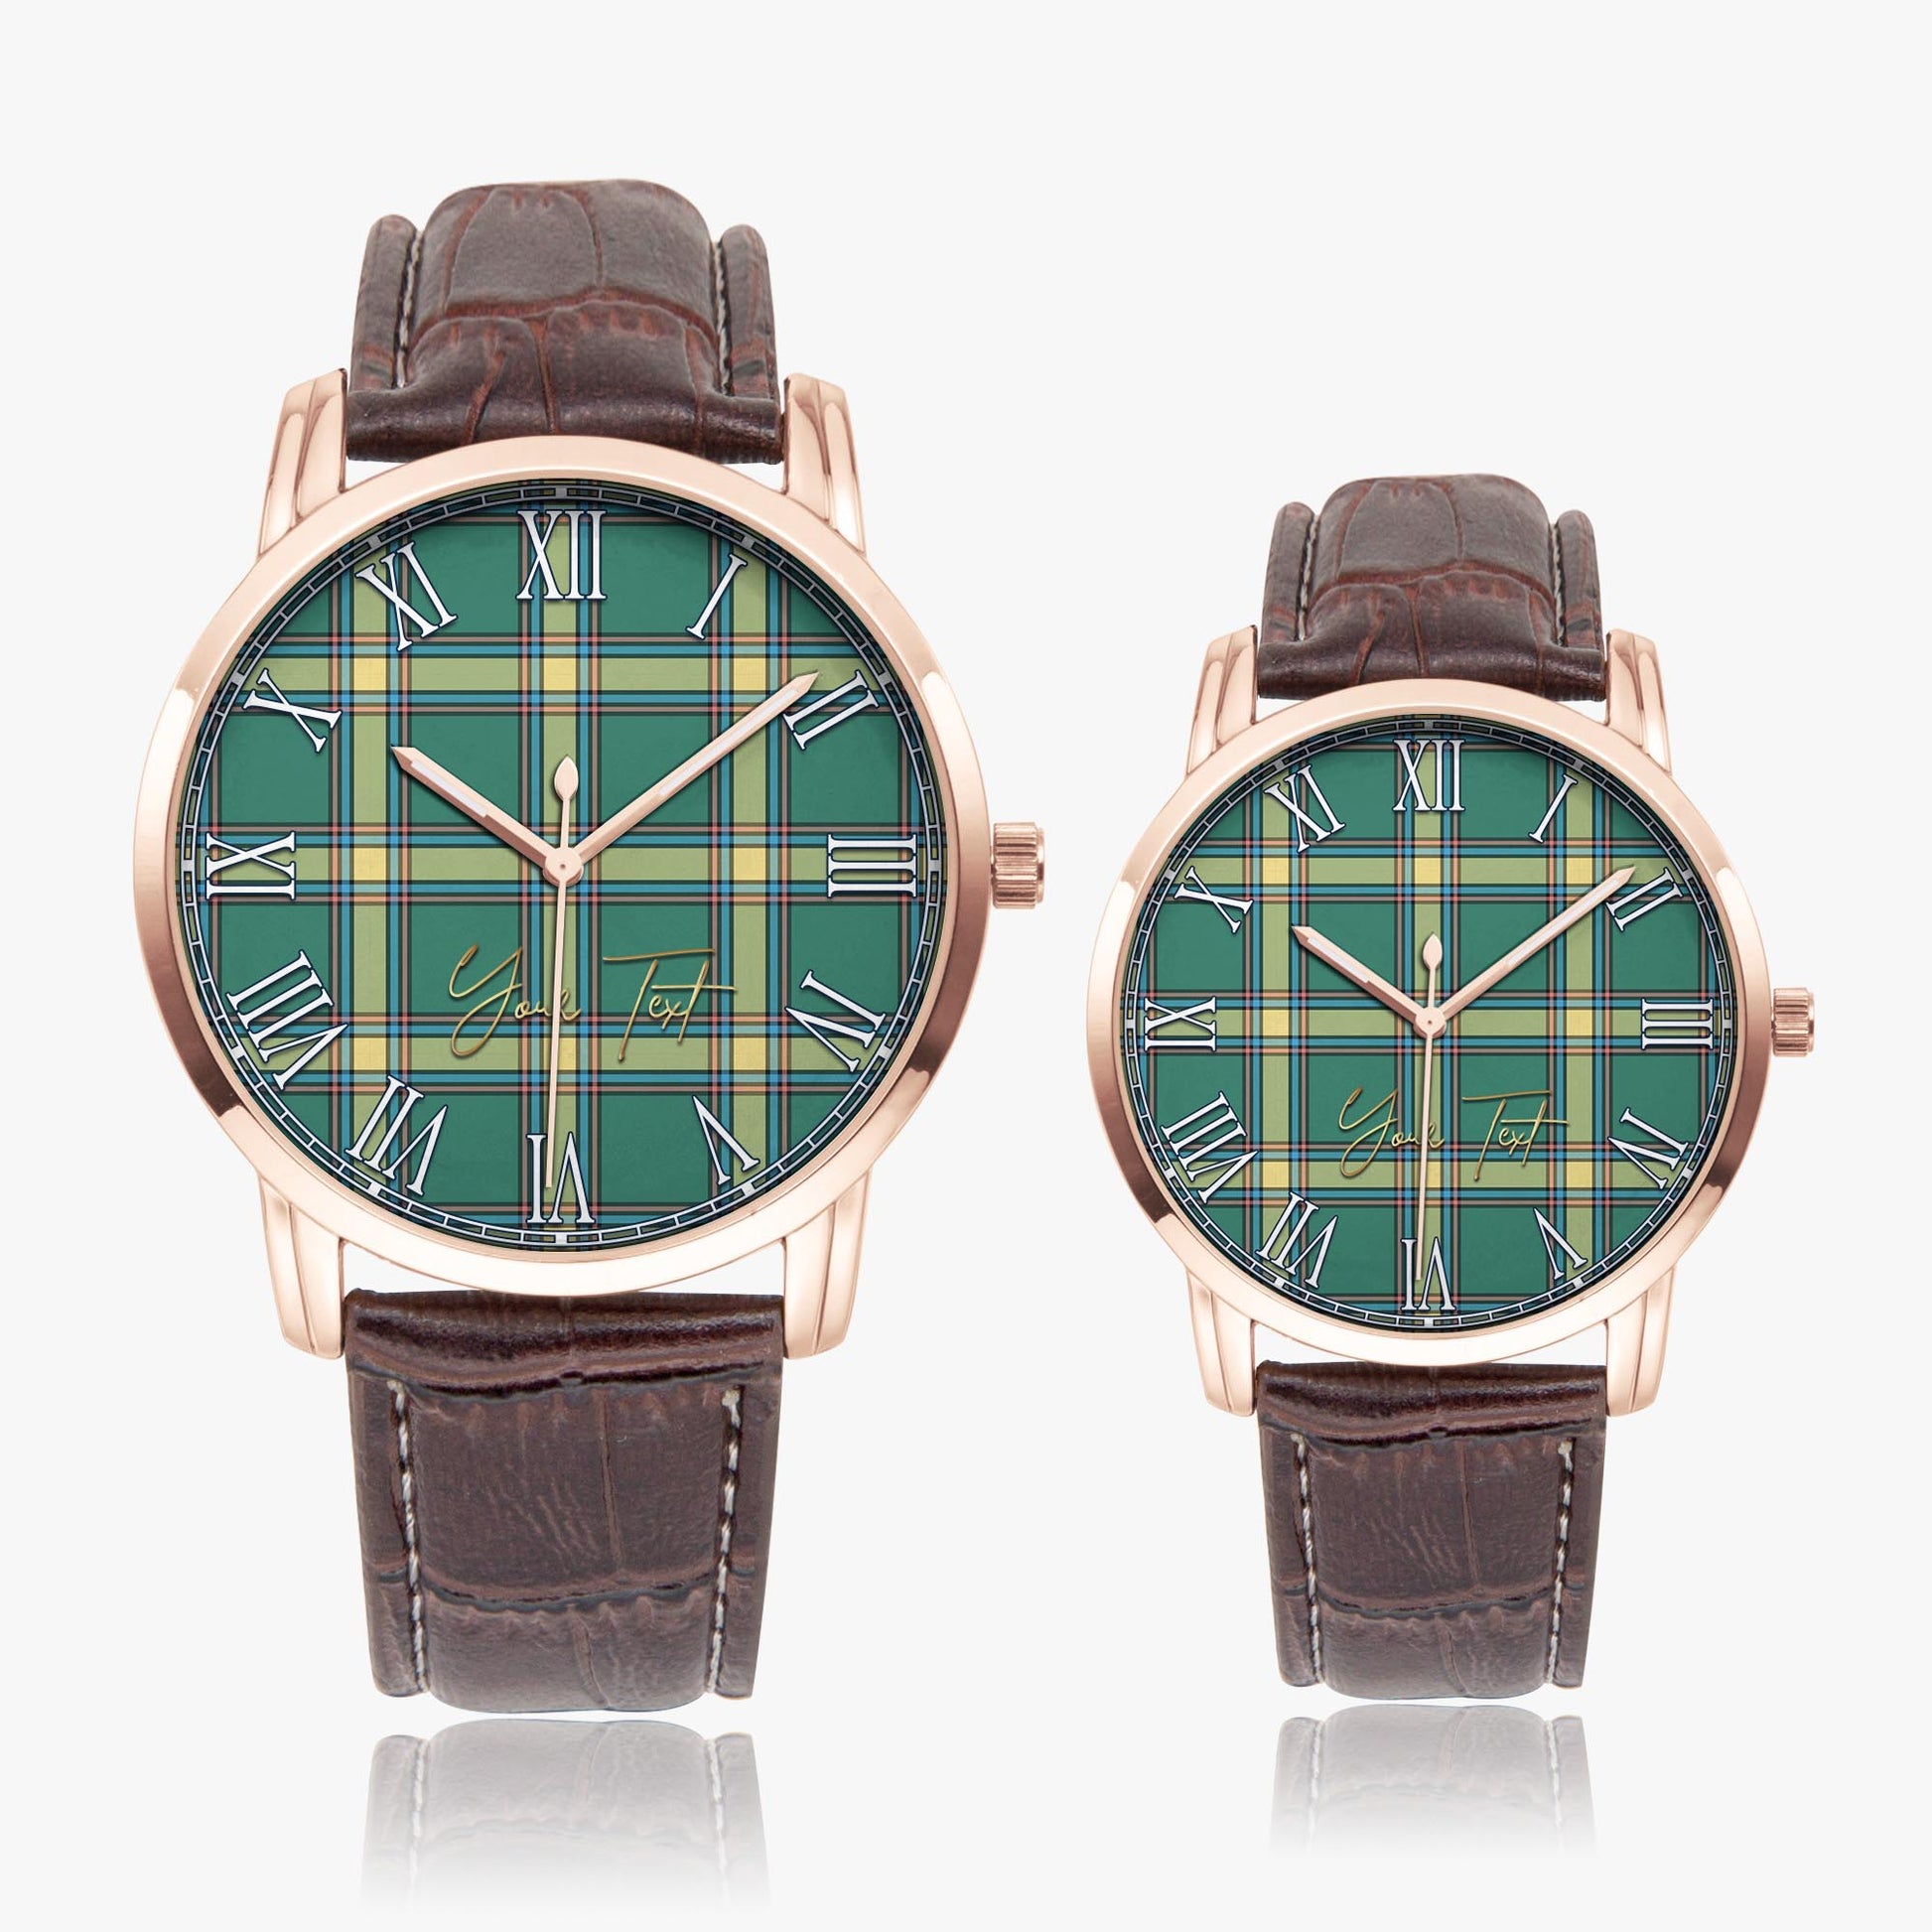 Alberta Province Canada Tartan Personalized Your Text Leather Trap Quartz Watch Wide Type Rose Gold Case With Brown Leather Strap - Tartanvibesclothing